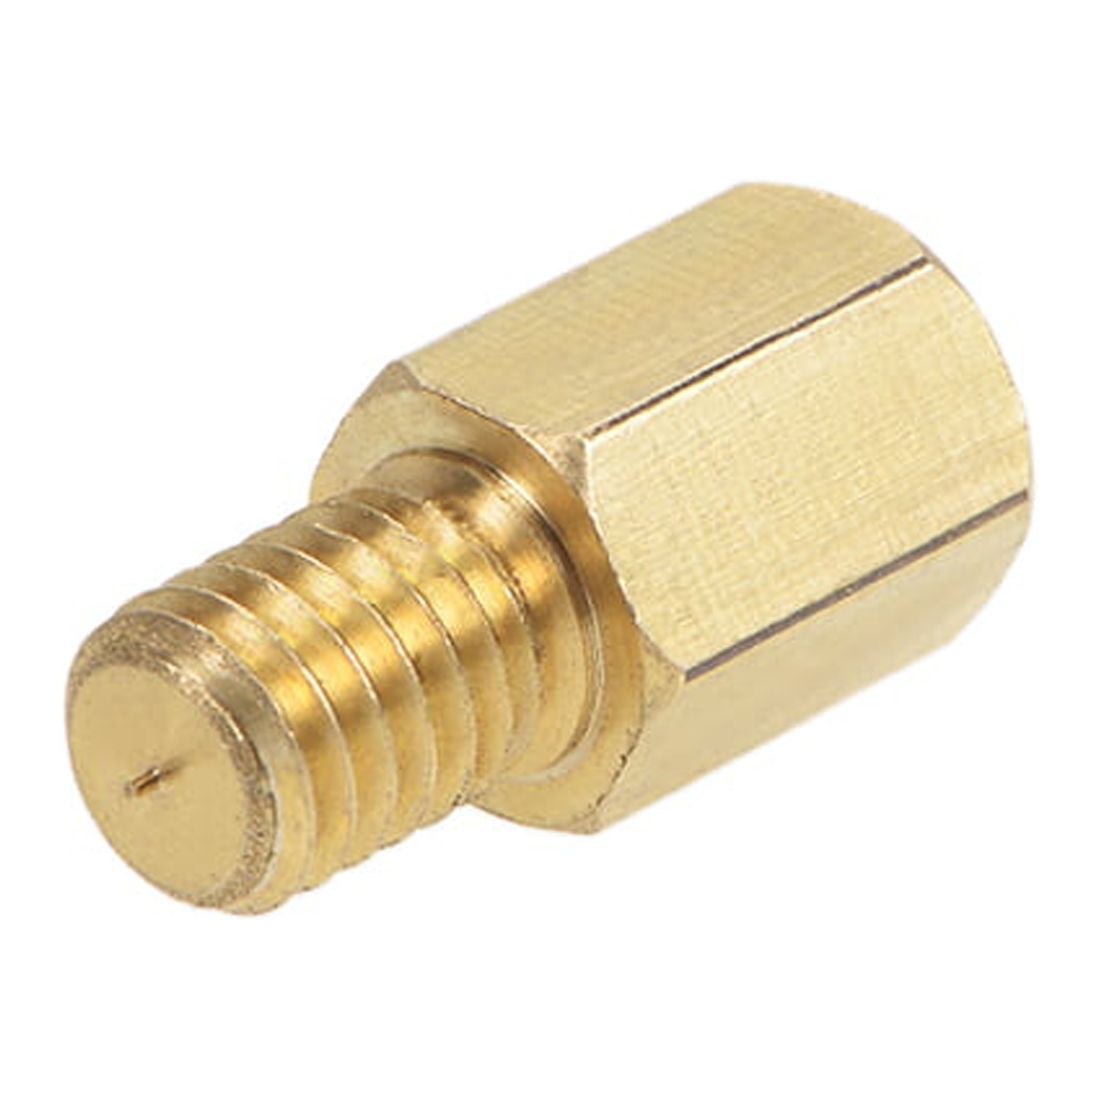 M6 x 20 mm + 8 mm Male to Female Hex Brass Spacer Standoff 5 Pcs 